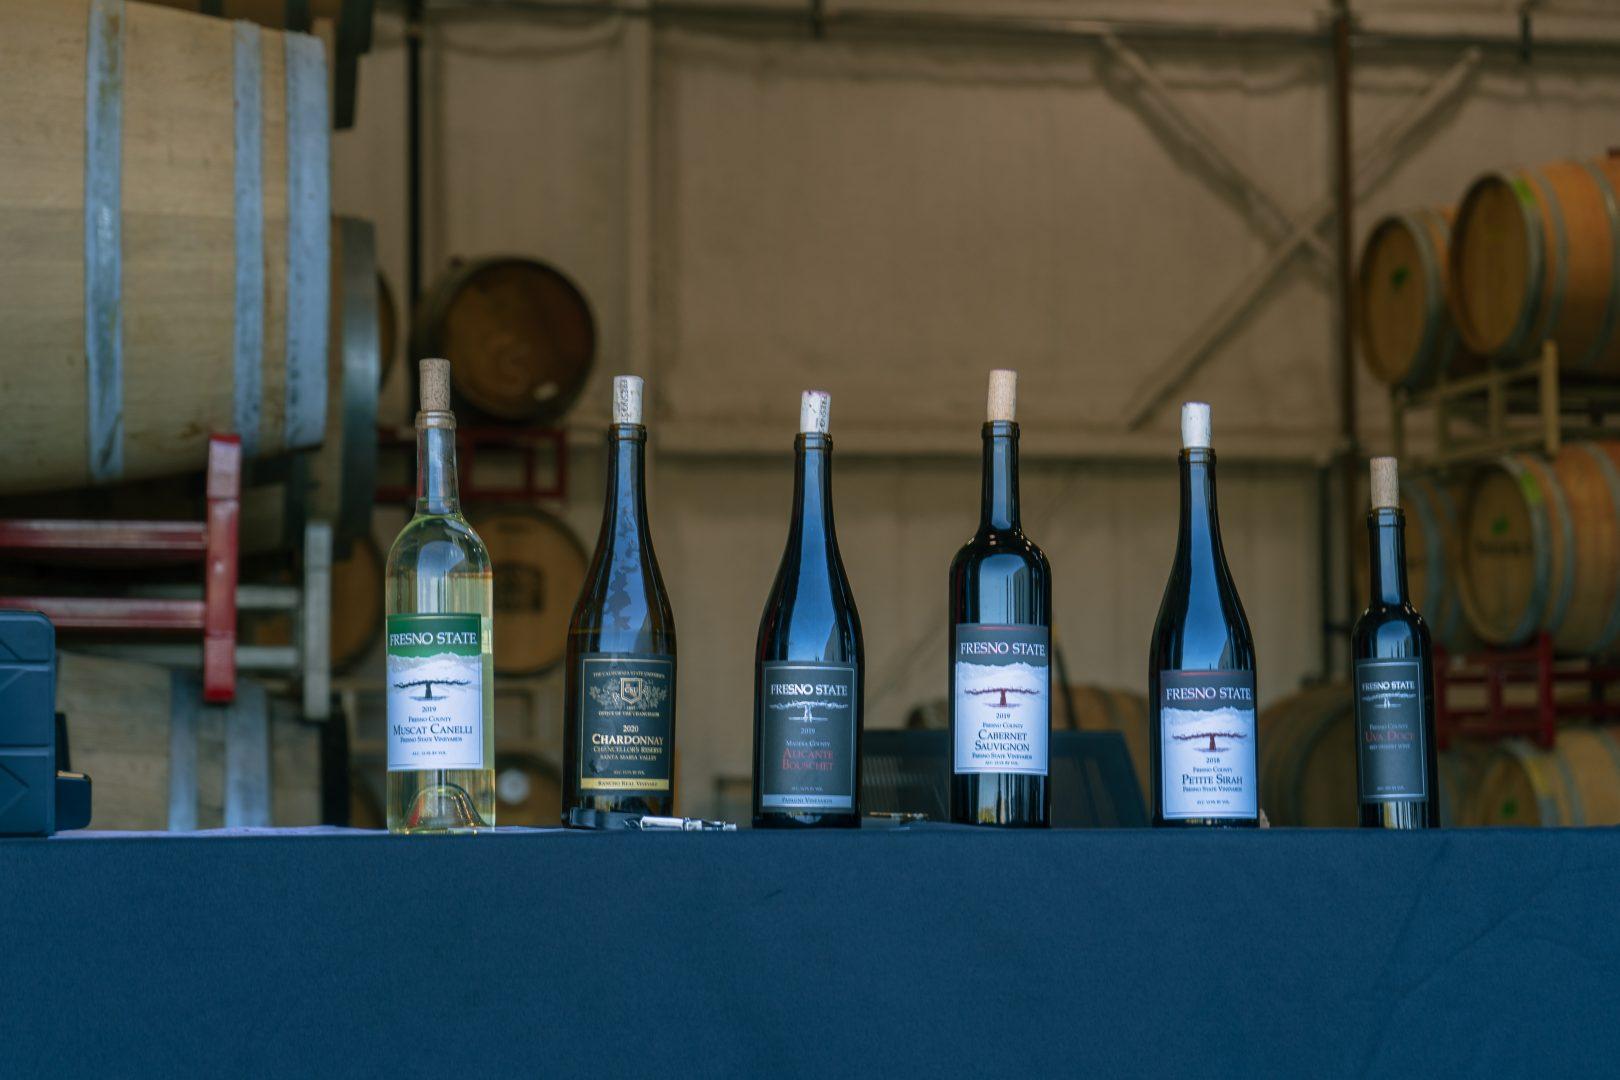 Friday Night Flights gives people the chance to taste Fresno States wines every Friday.